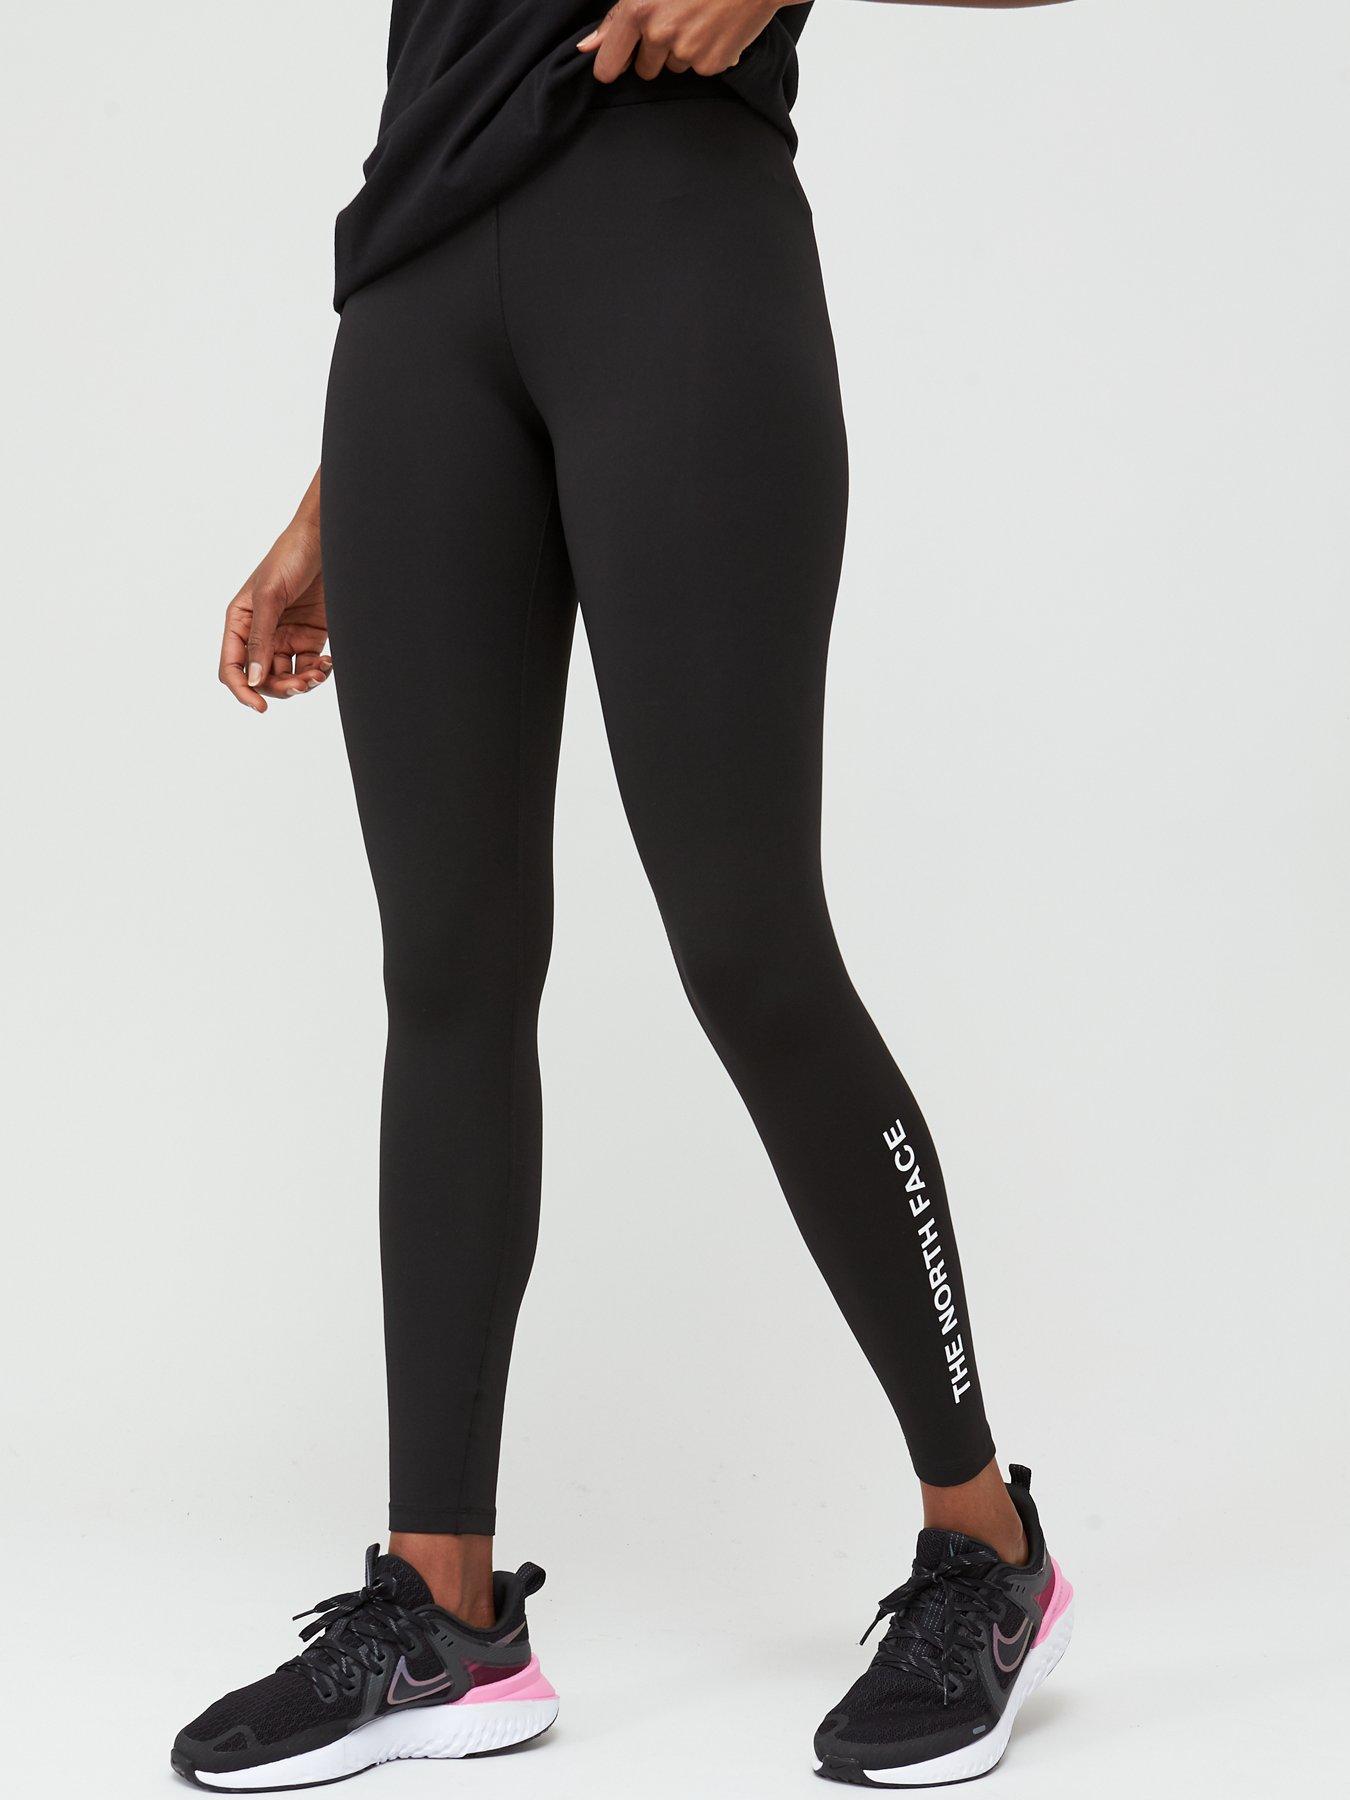 Buy The North Face® Zumu Leggings from the Next UK online shop